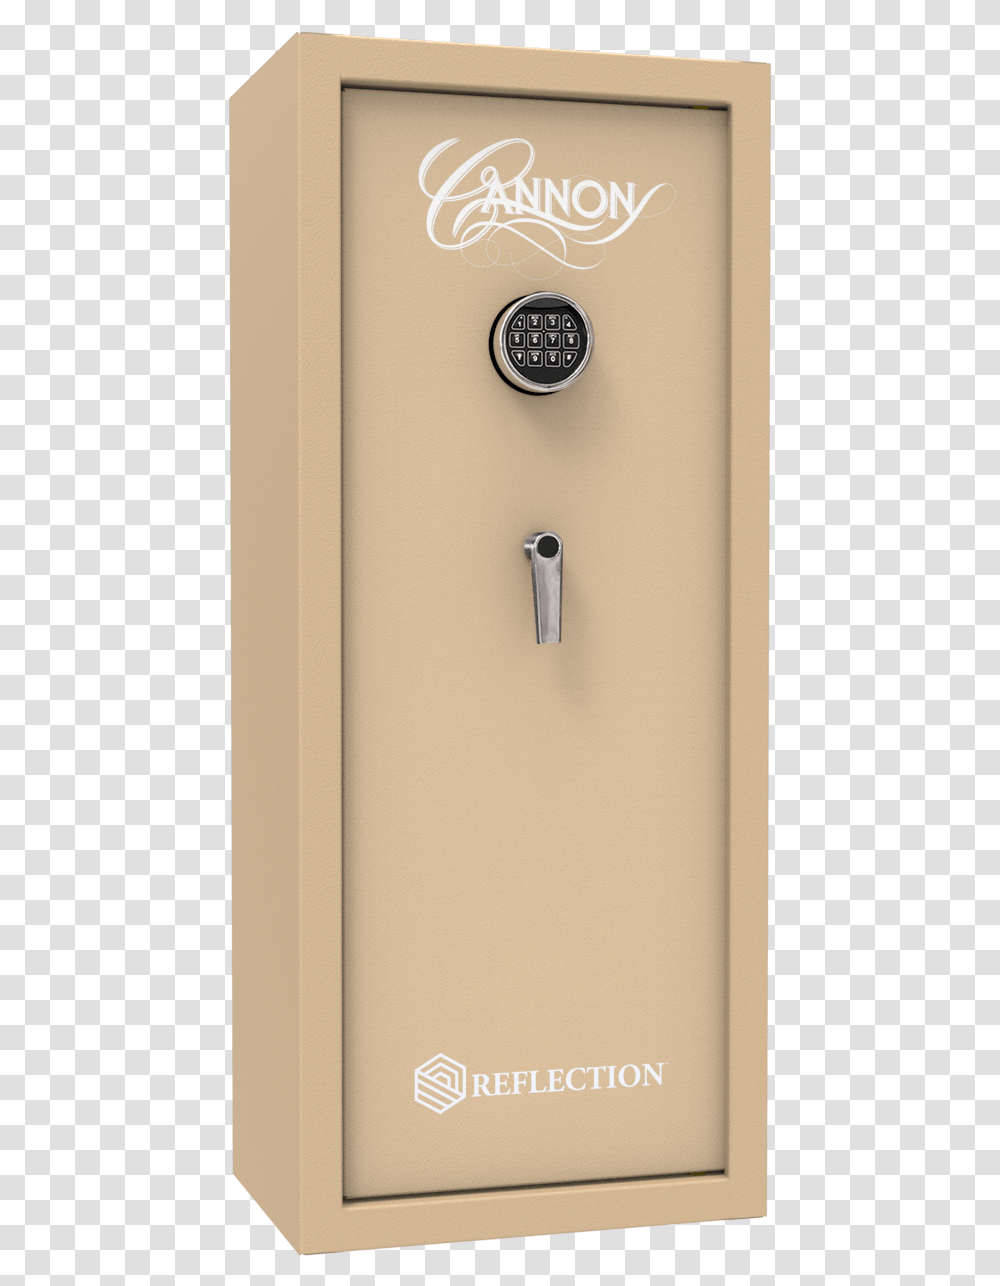 Pretty Home Safe For Jewelry And Valuables Cannon 24 Gun Safe, Home Decor, Appliance, Refrigerator Transparent Png